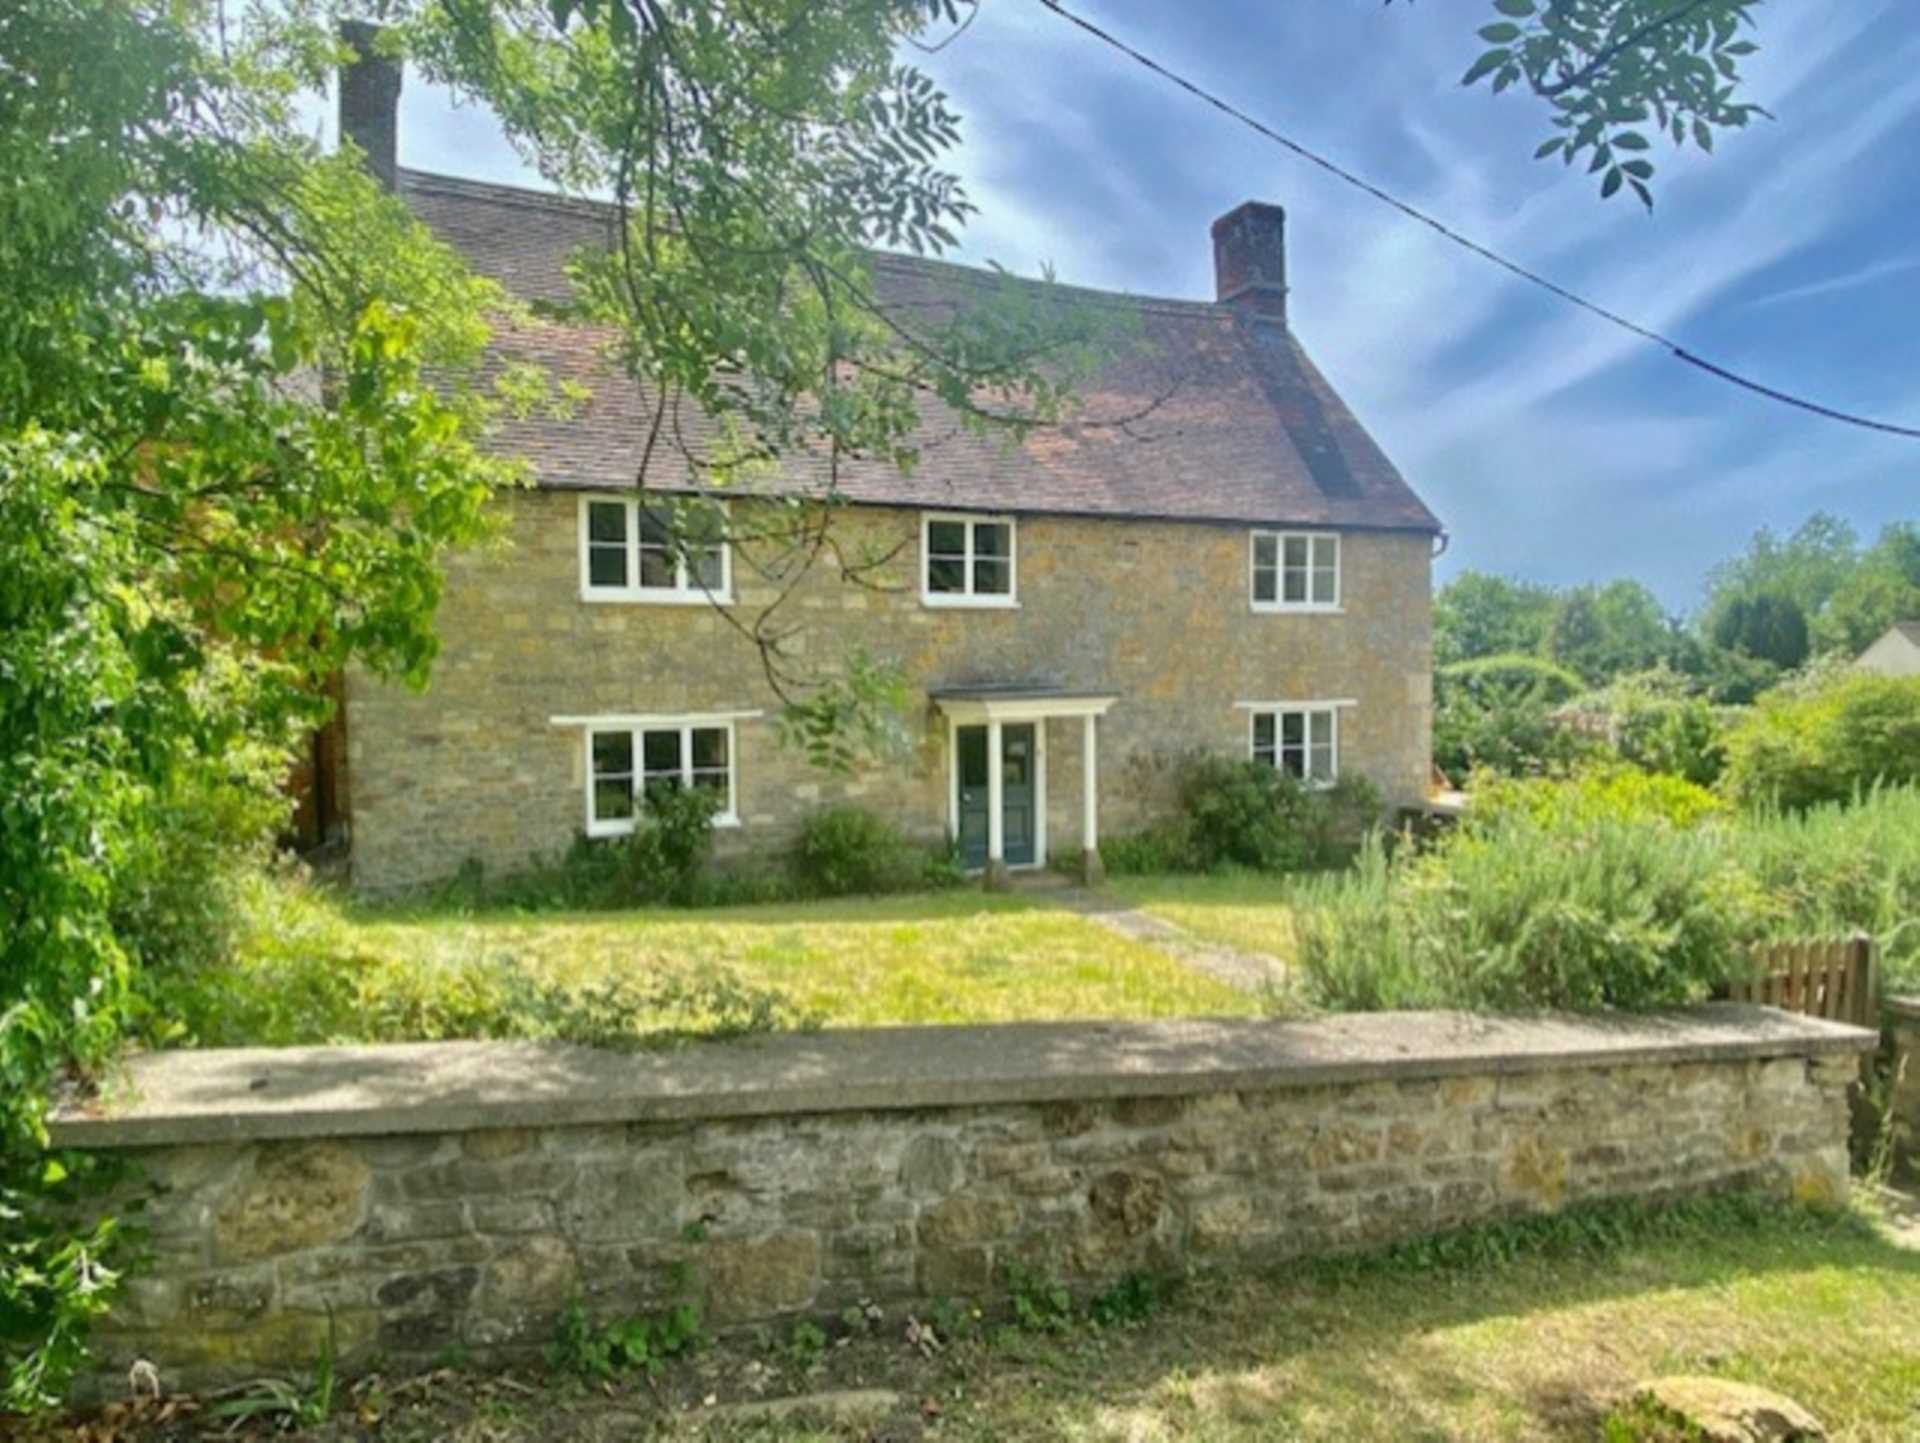 Swallows Property Letting - 5 Bedroom Country House, Church Hill, Kington Magna